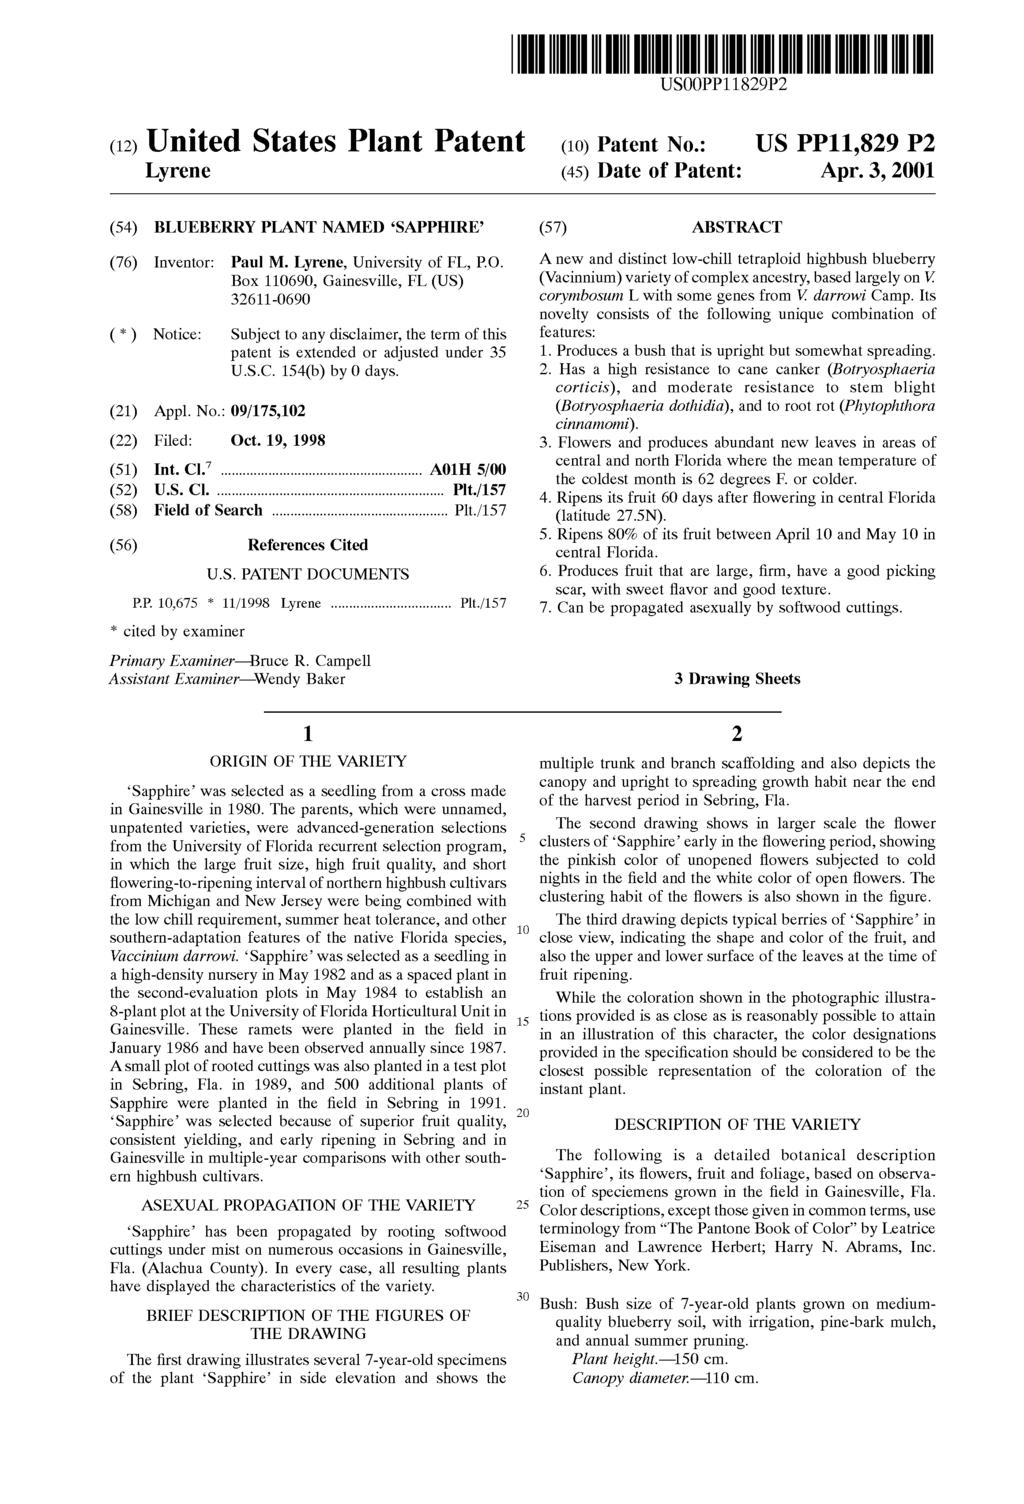 USOOPP11829P2 (12) United States Plant Patent Lyrene (10) Patent No.: (45) Date of Patent: Apr. 3, 2001 (54) BLUEBERRY PLANT NAMED SAPPHIRE (76) Inventor: Paul M. Lyrene, University of FL, P.O. Box 110690, Gainesville, FL (US) 32611-0690 (*) Notice: Subject to any disclaimer, the term of this patent is extended or adjusted under 35 U.